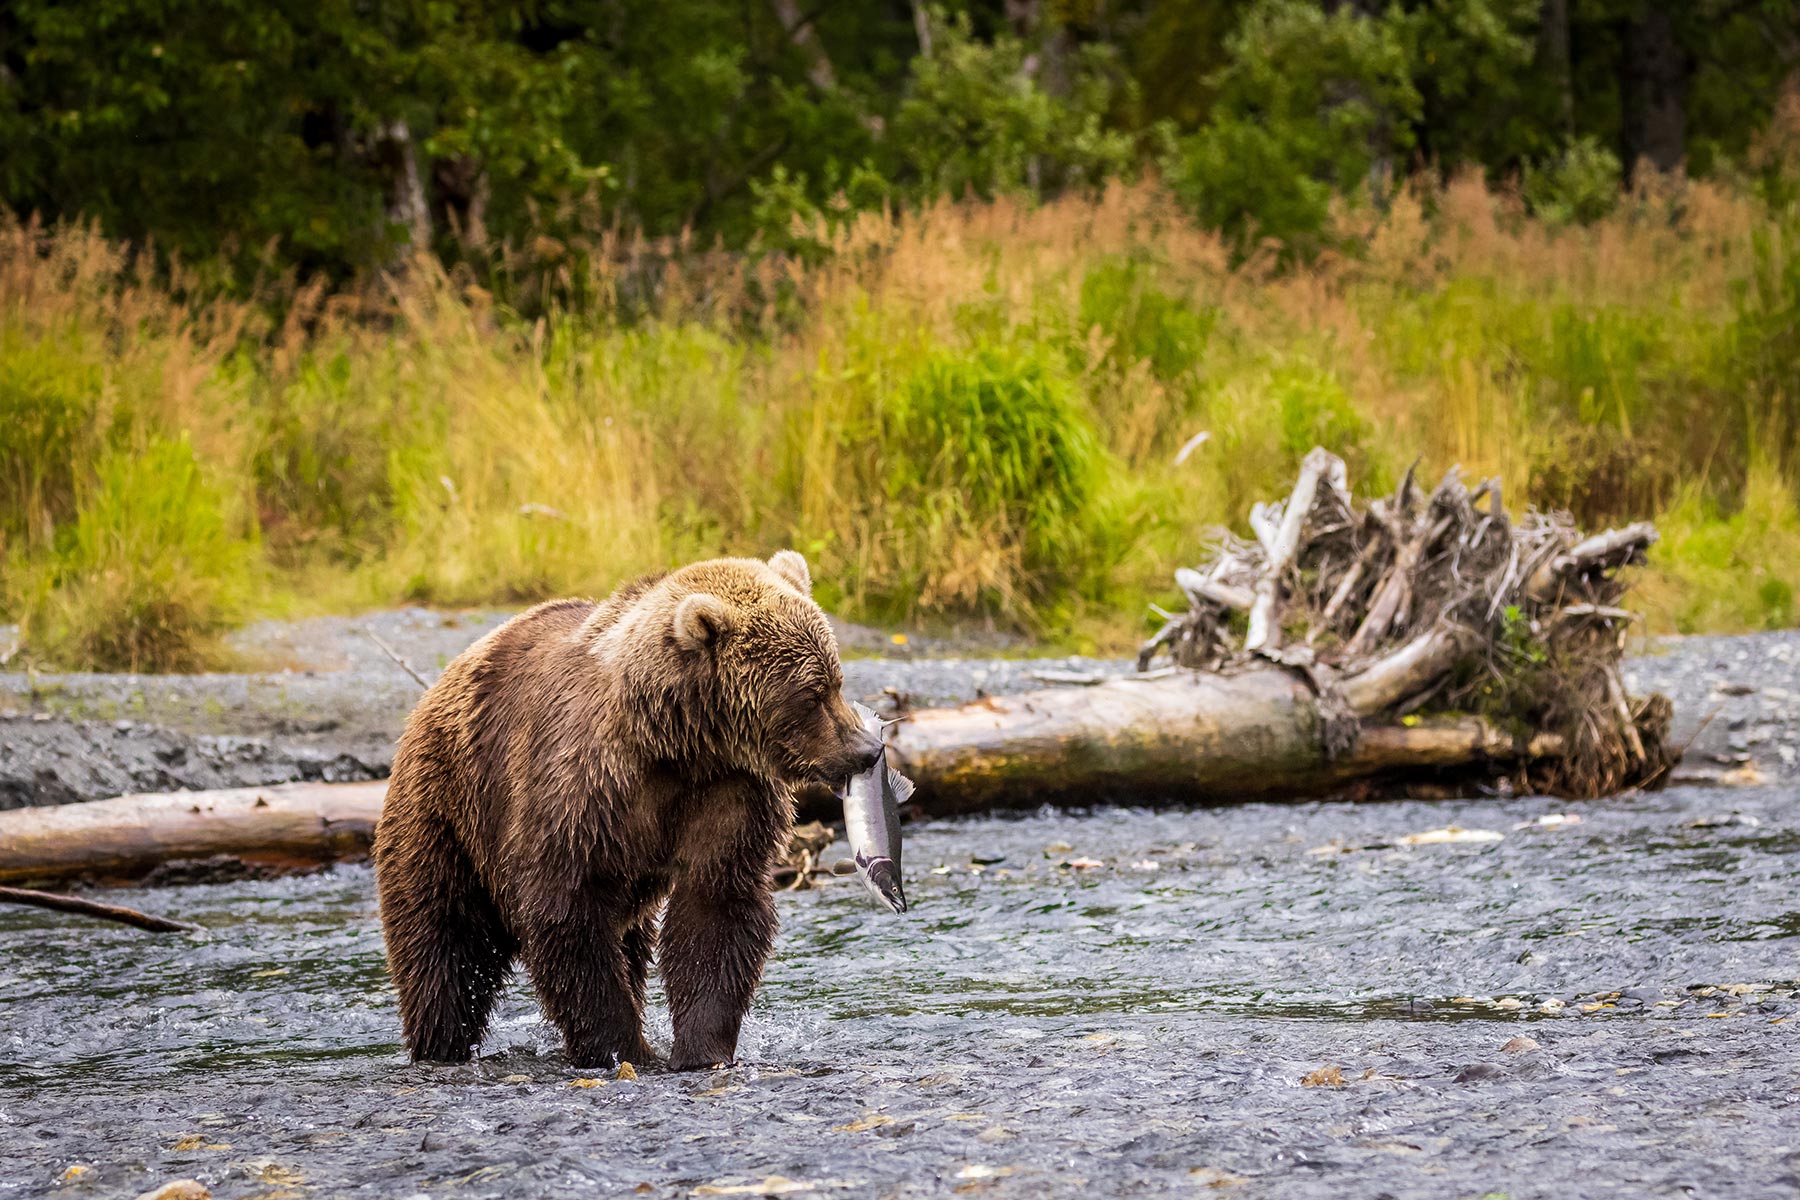 Bear with a salmon in its mouth